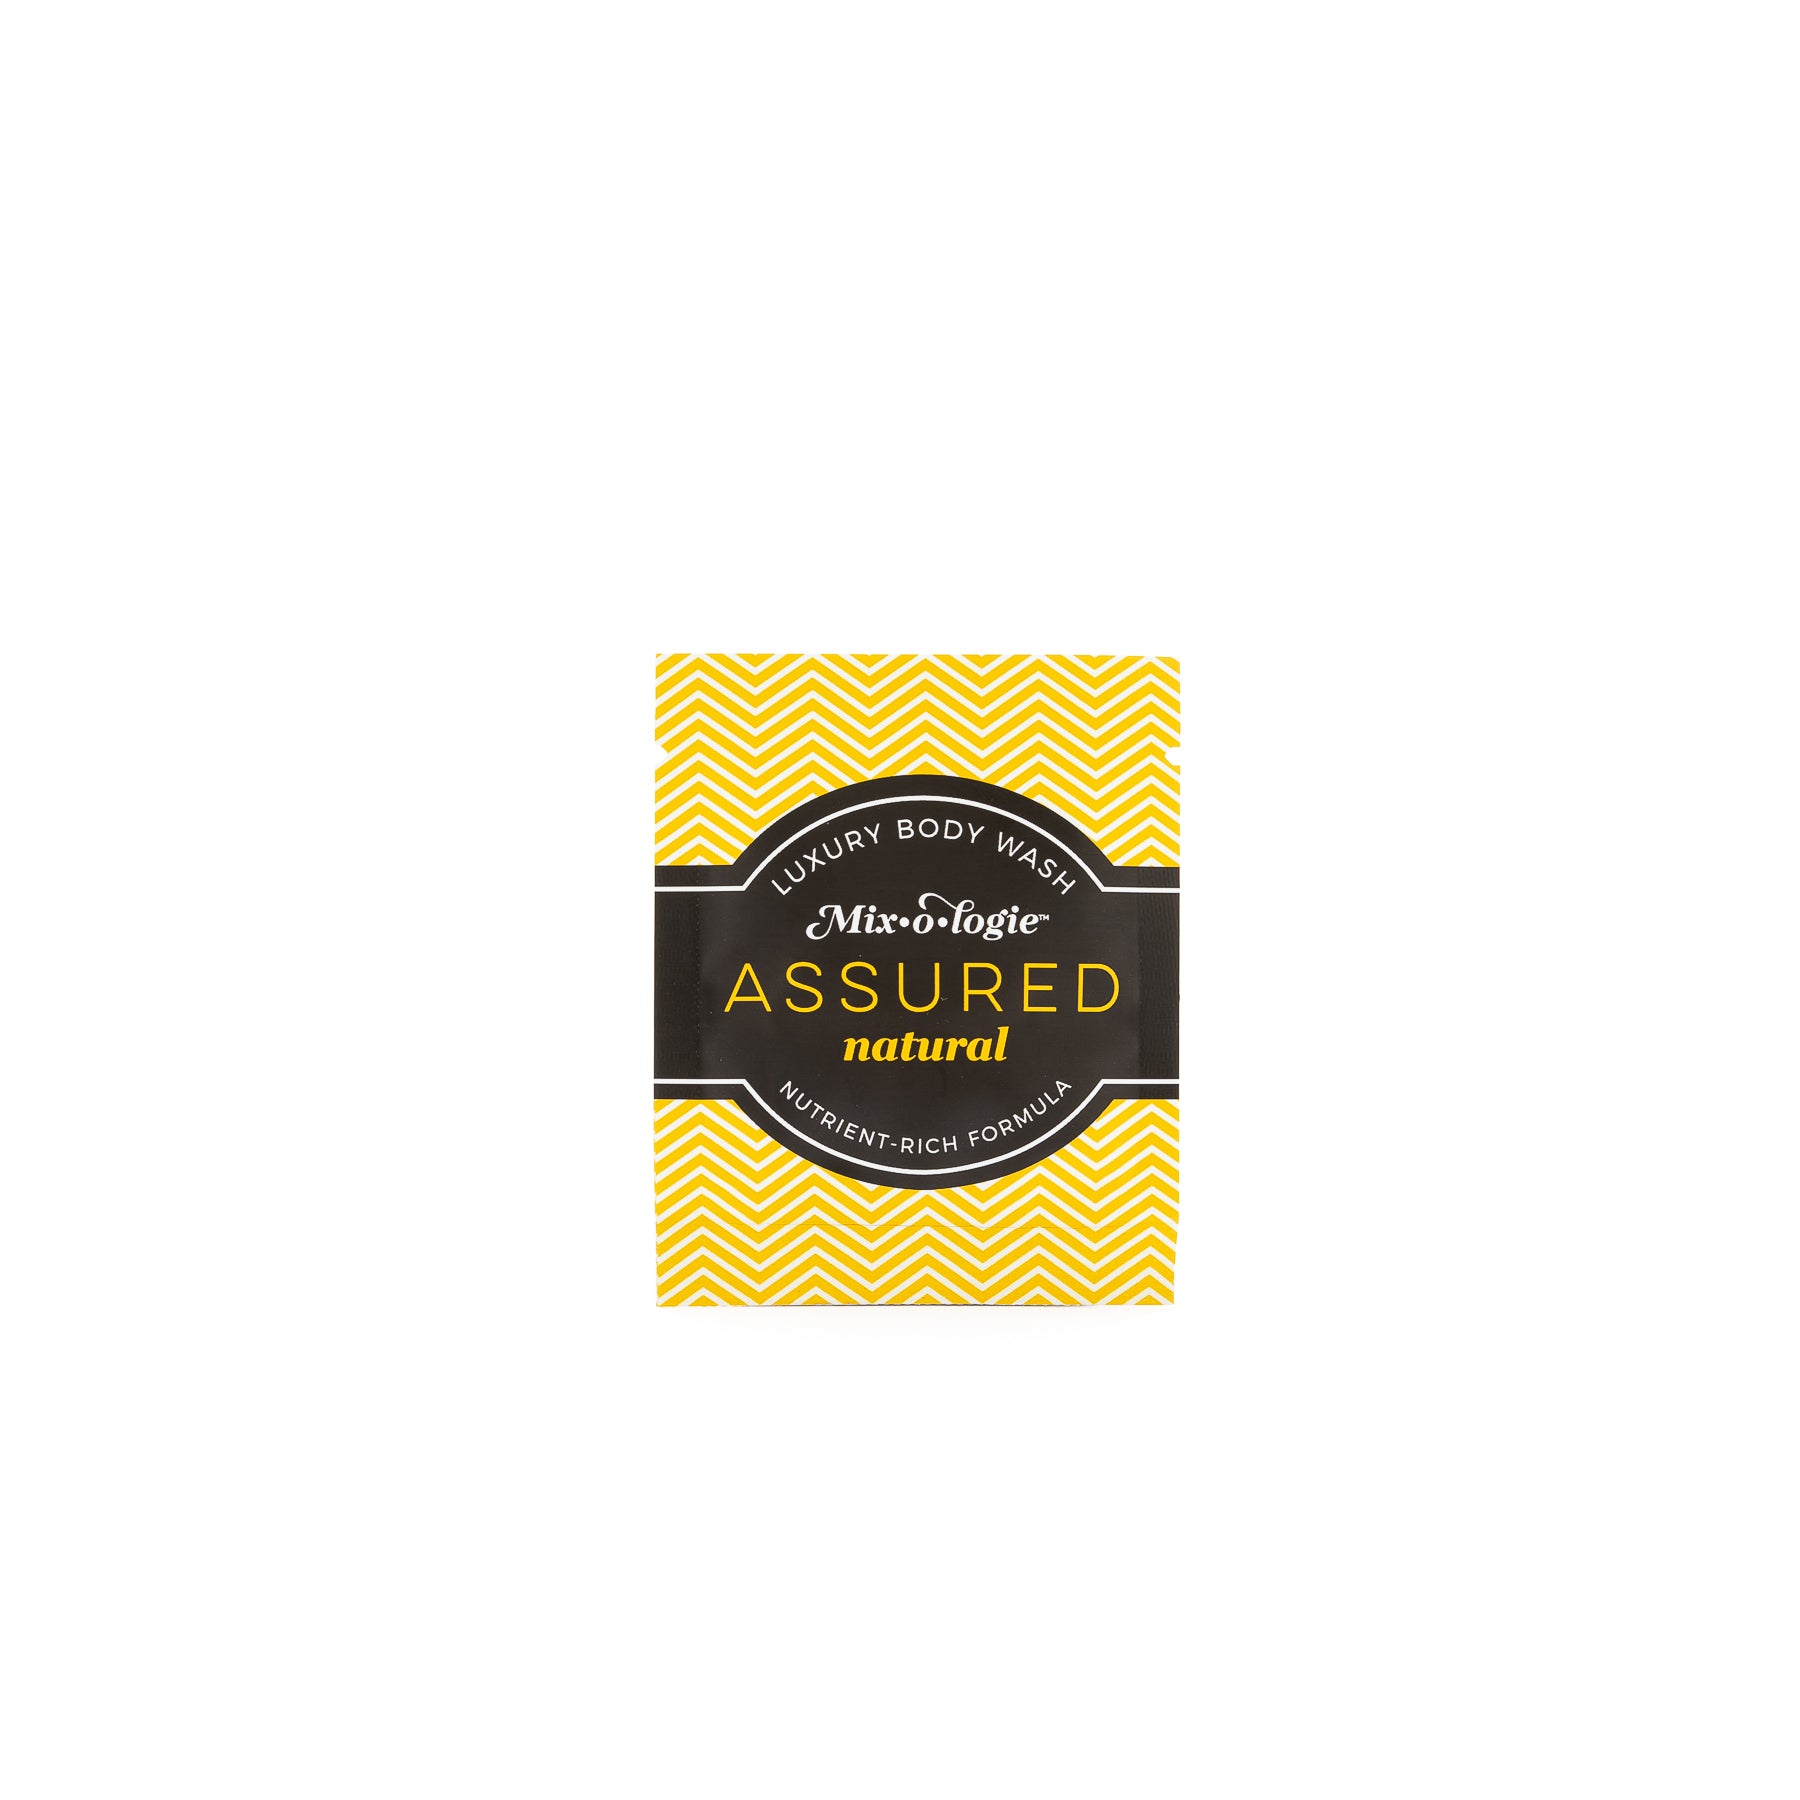 Luxury Body Wash Sample of Assured (Natural) in mustard color sample package with mustard chevron pattern and black label in white background.